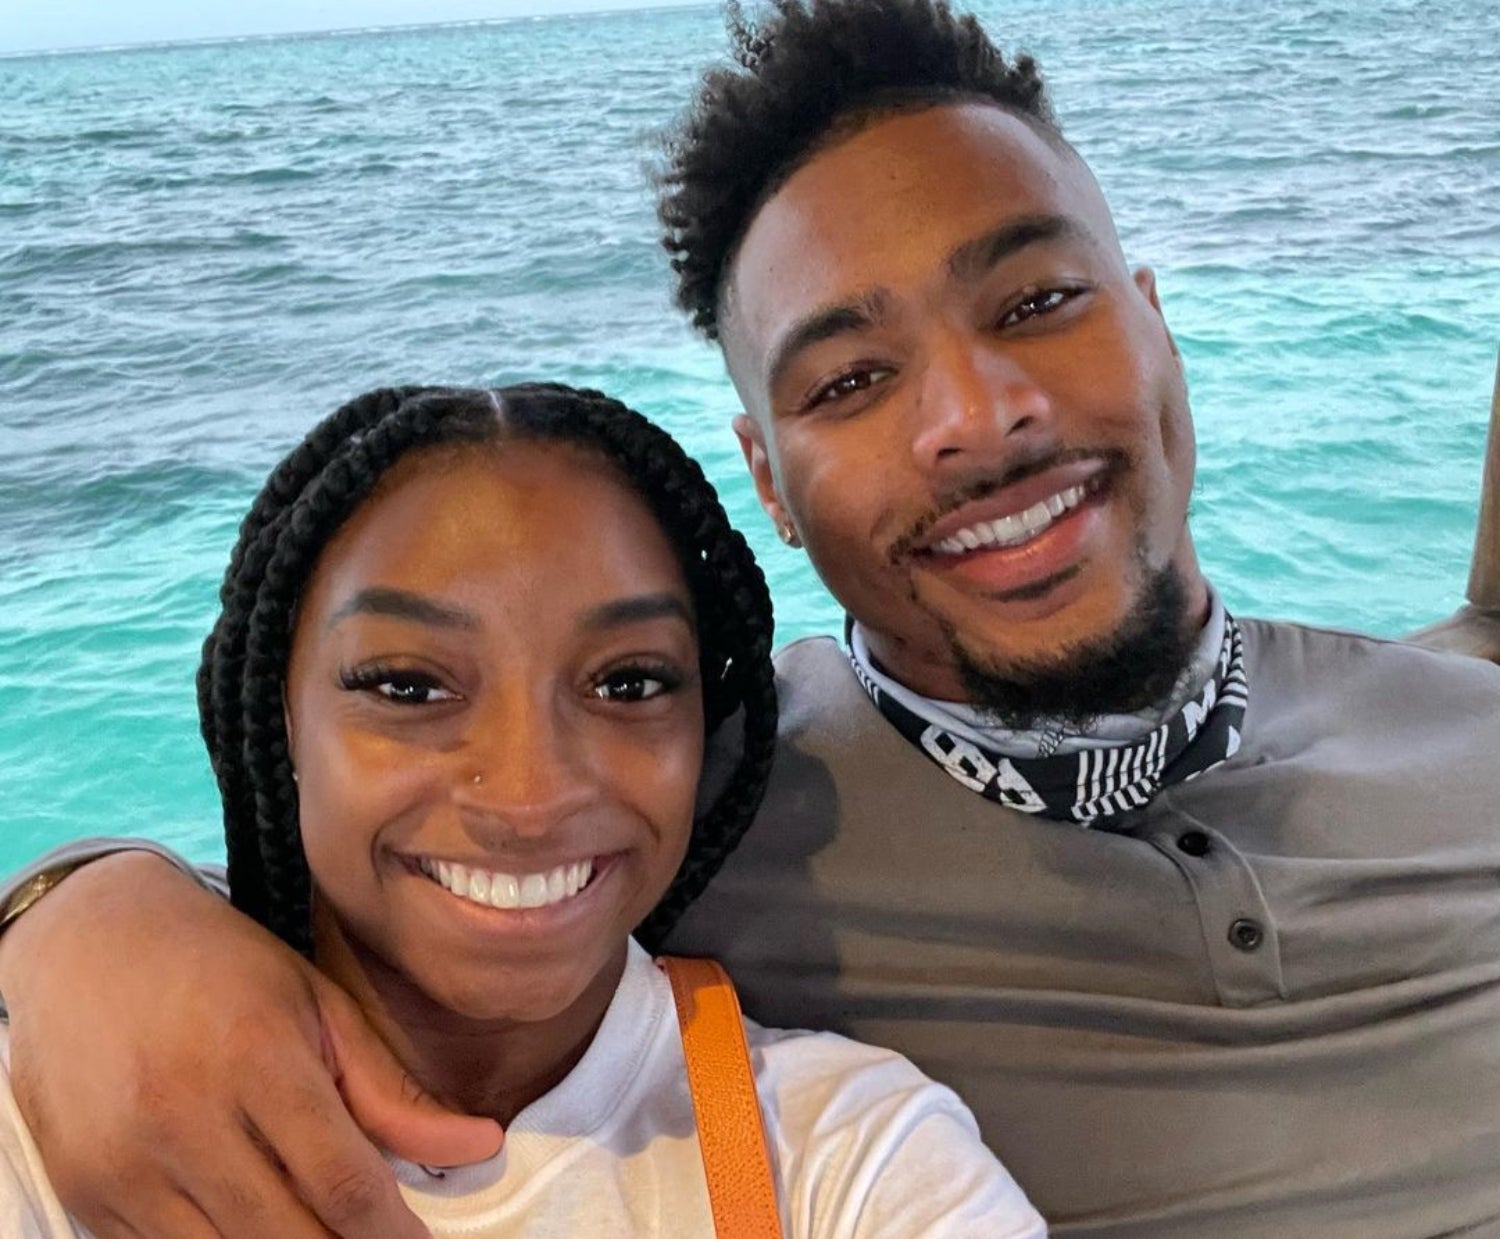 Simone Biles’ Boyfriend Publicly Praises Her Amid Support, Criticism: ‘Imma Ride With You Through Whatever’